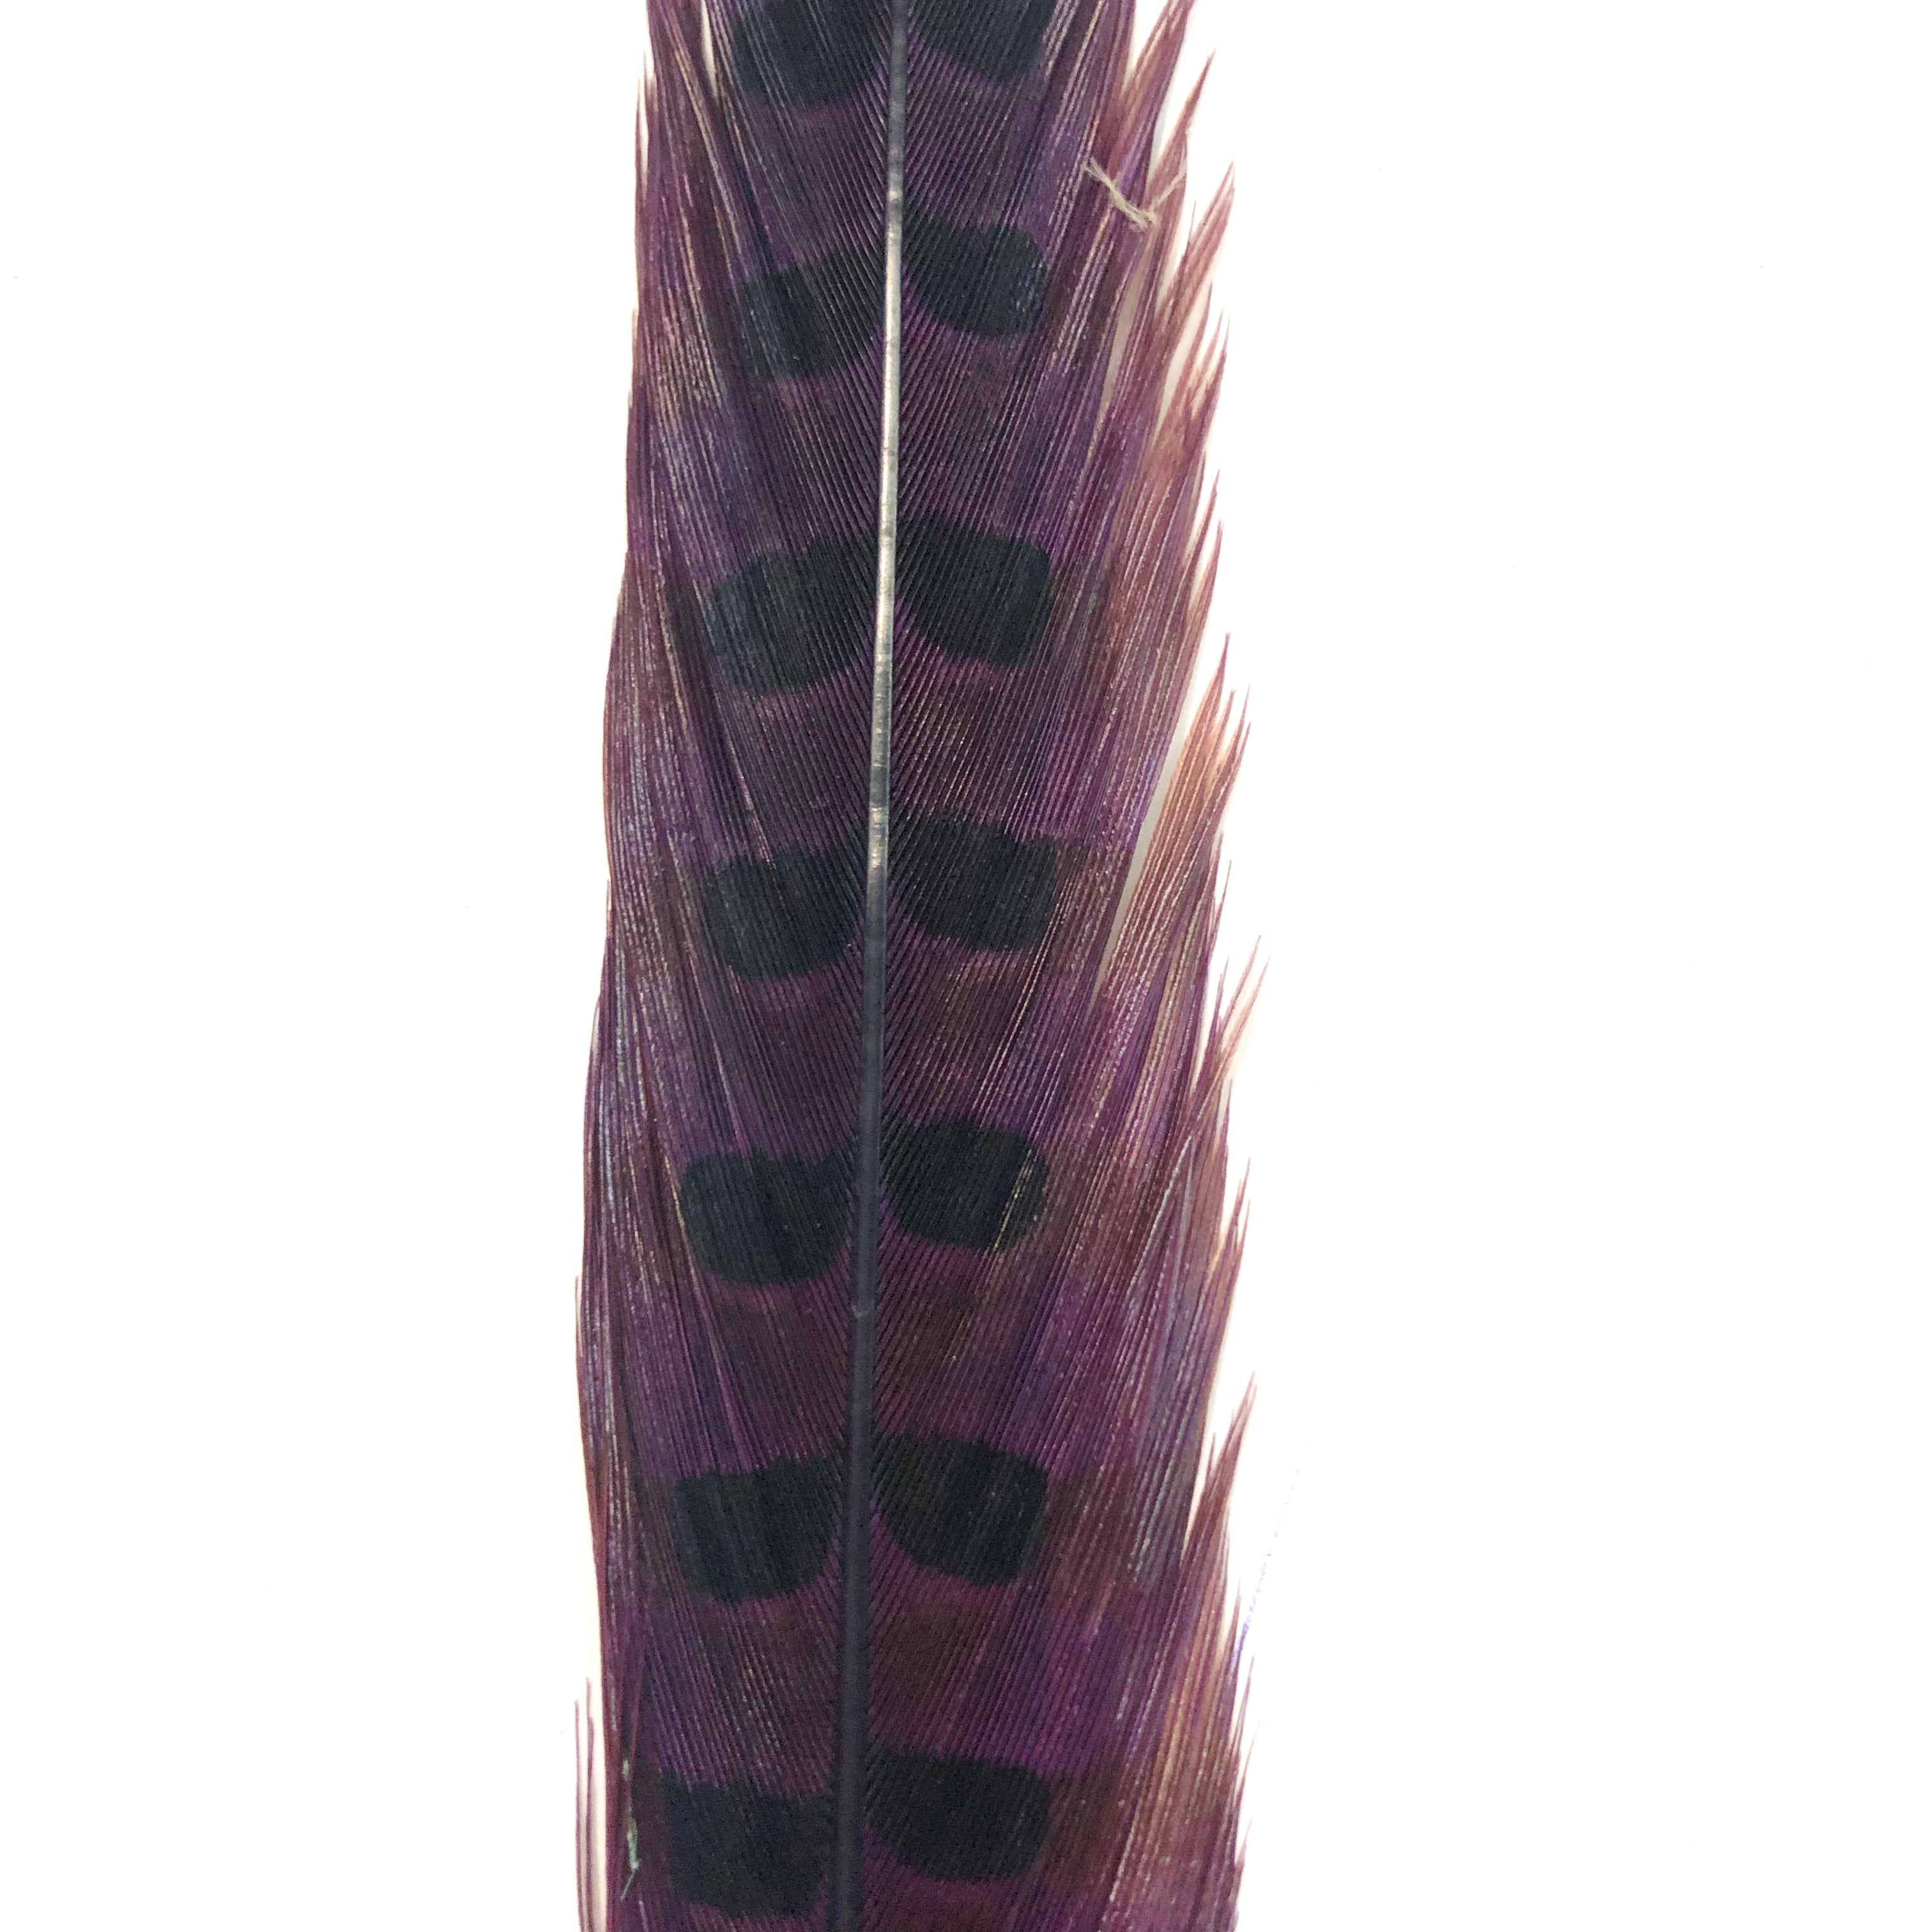 10" to 20" Ringneck Pheasant Tail Feather - Eggplant ((SECONDS))